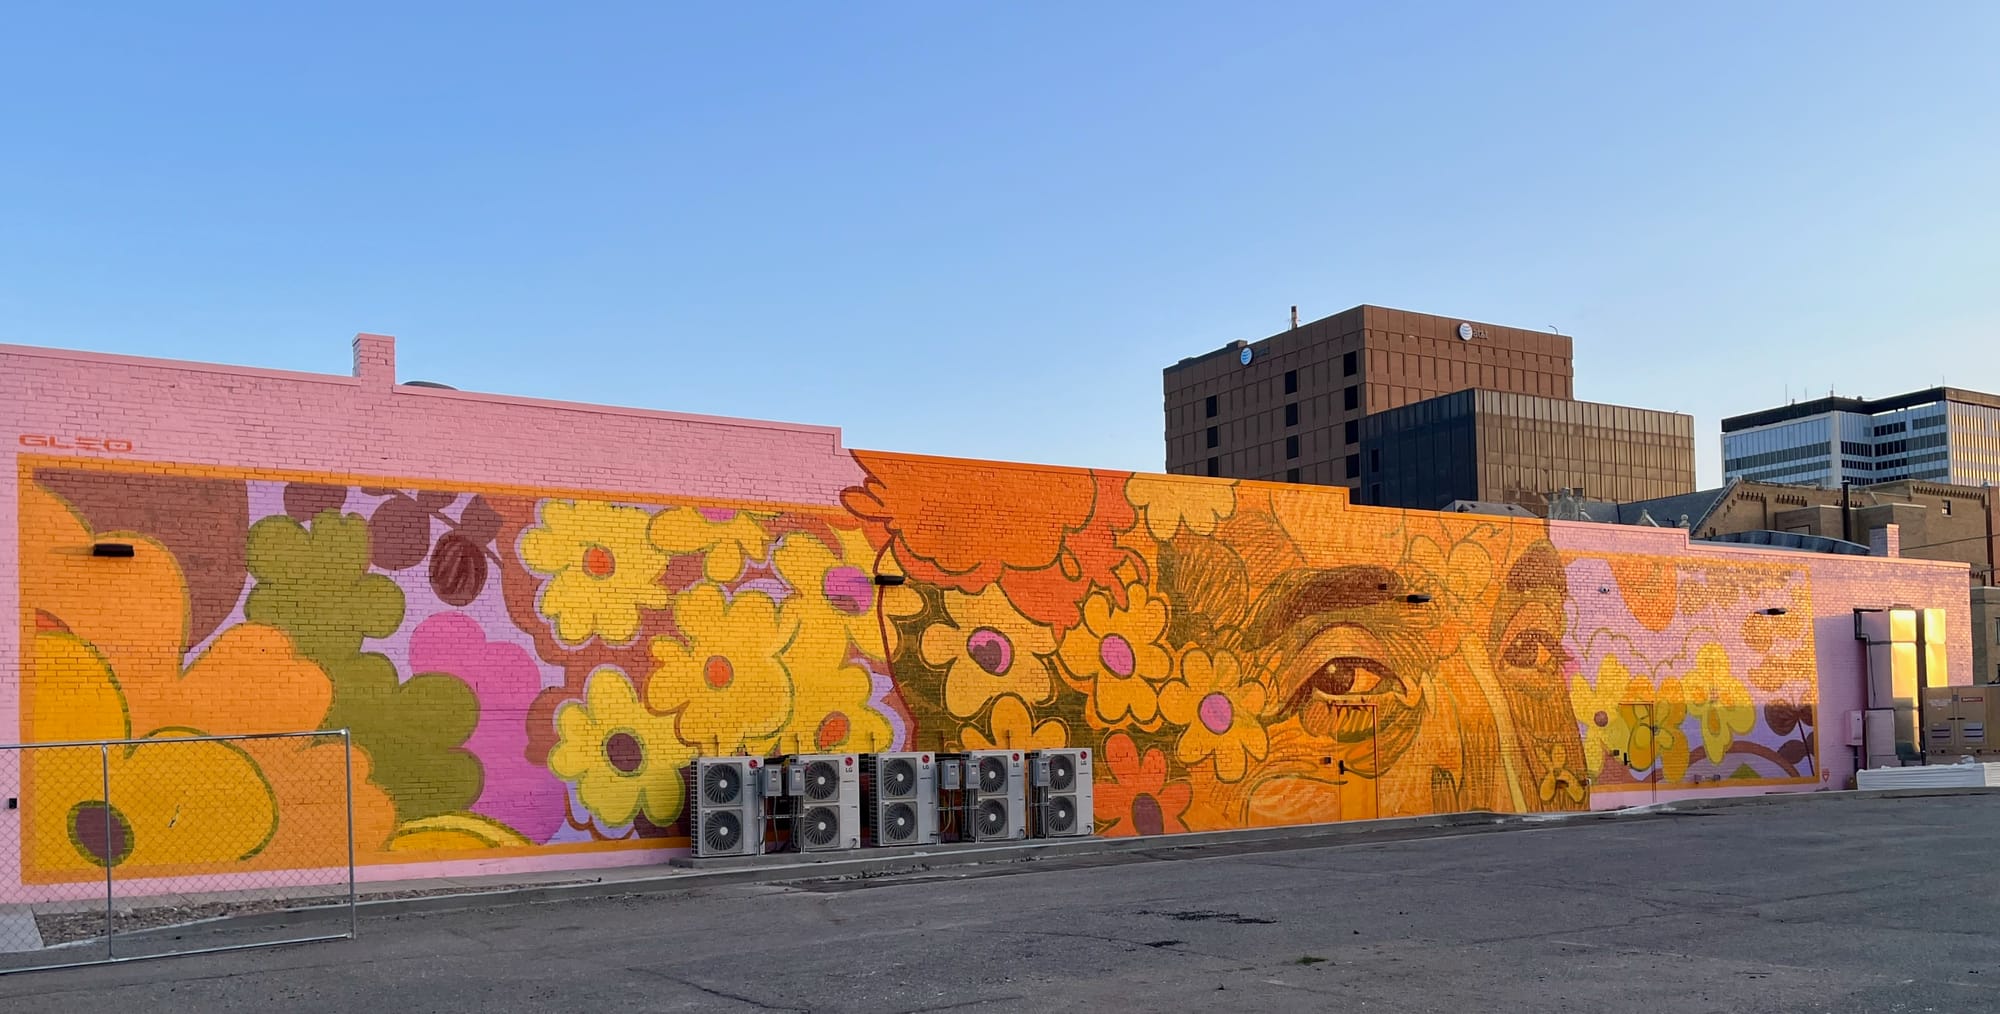 A graffiti-covered music festival lands in downtown Wichita this weekend